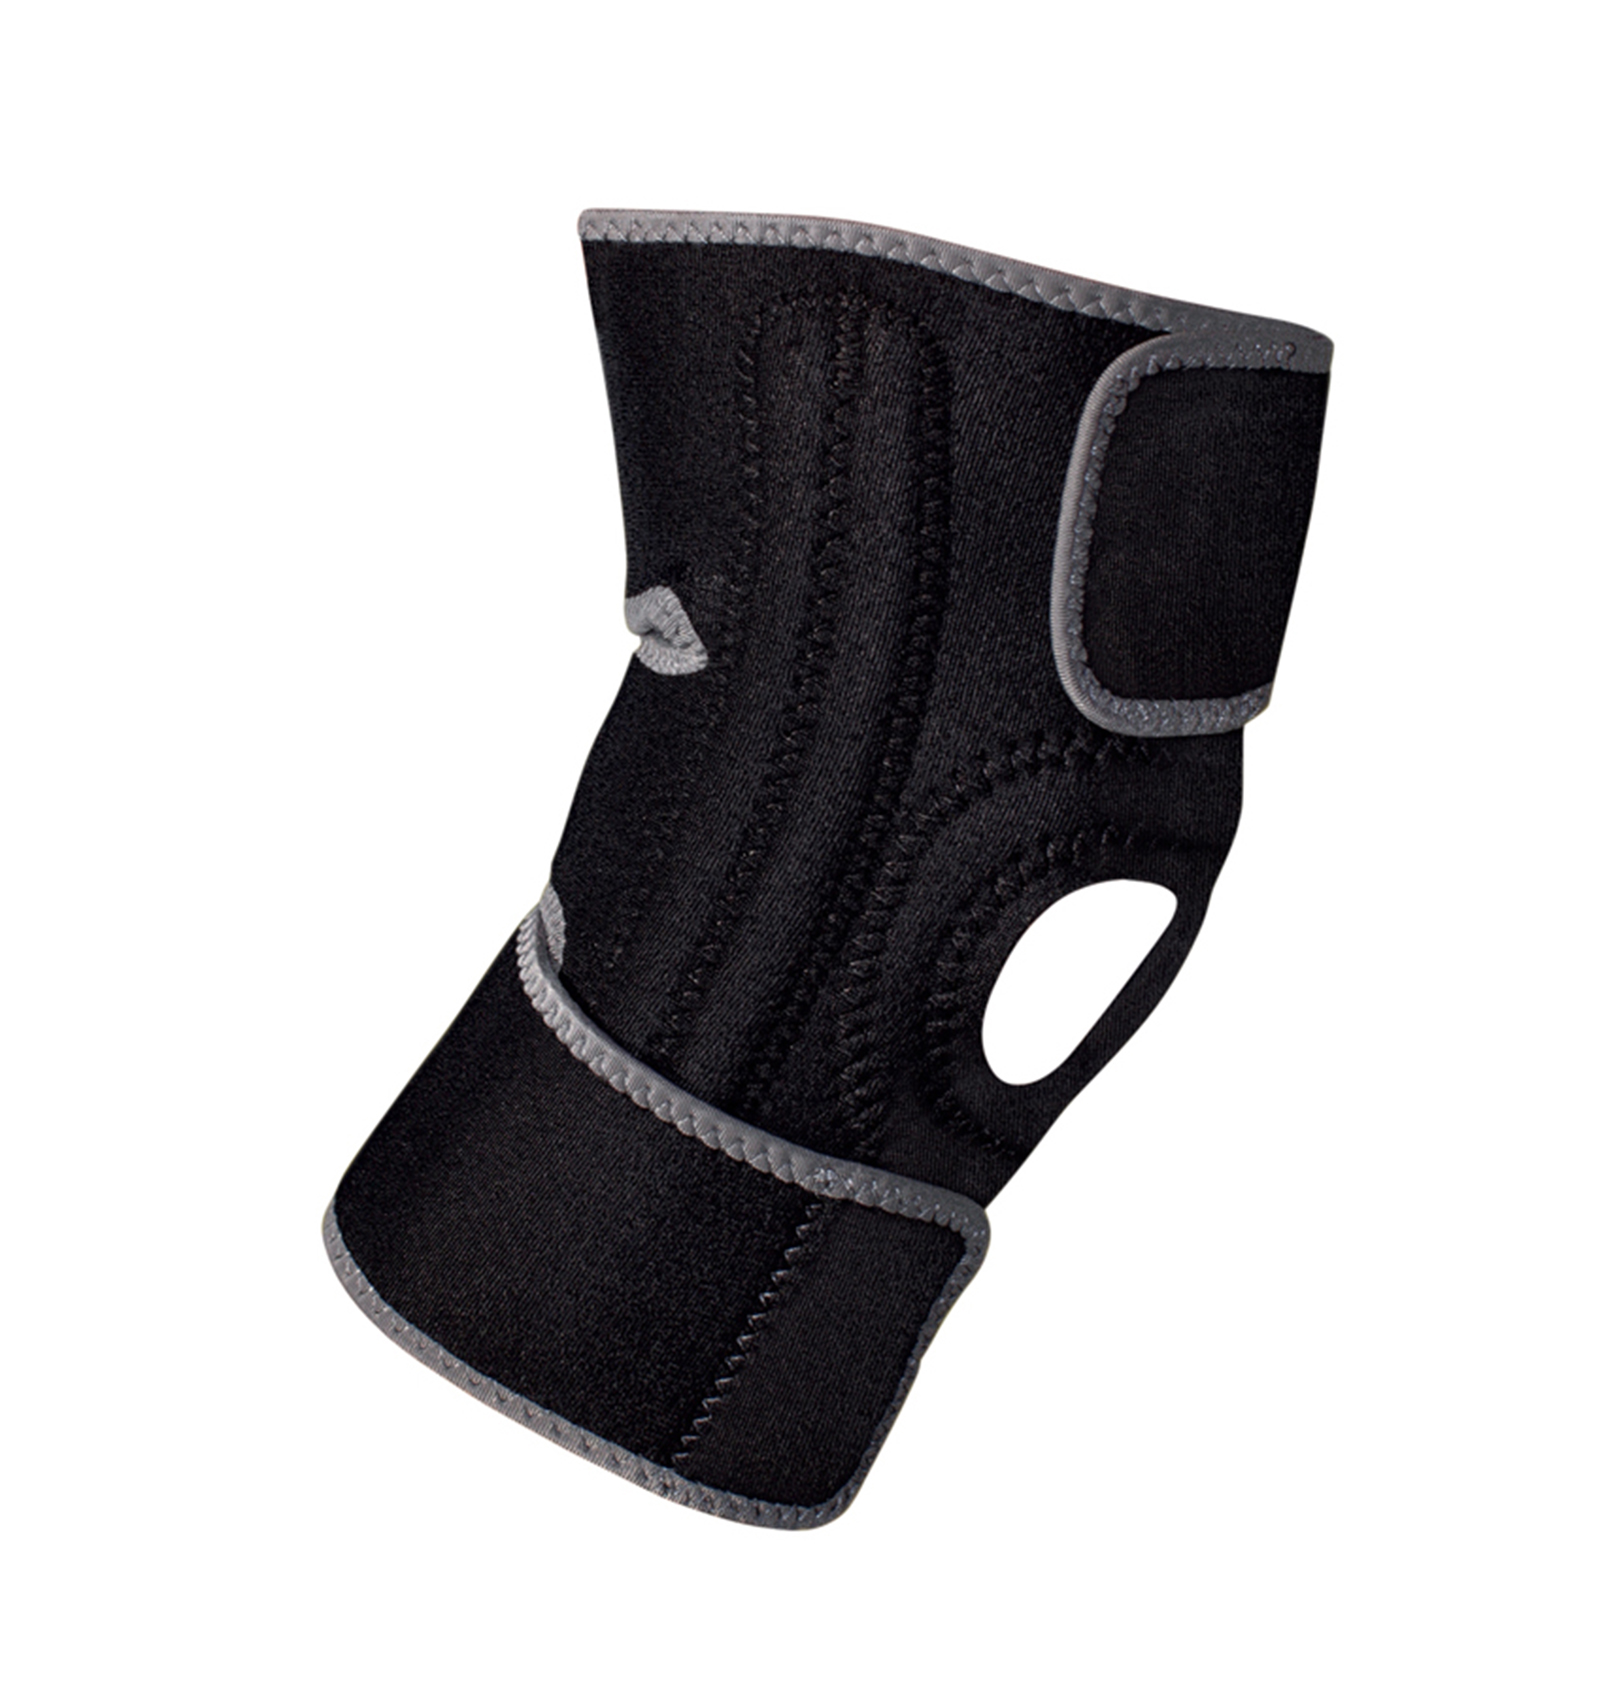 0051131199989 - ACE(TM) KNEE SUPPORT WITH SIDE STABILIZERS ADJUSTABLE